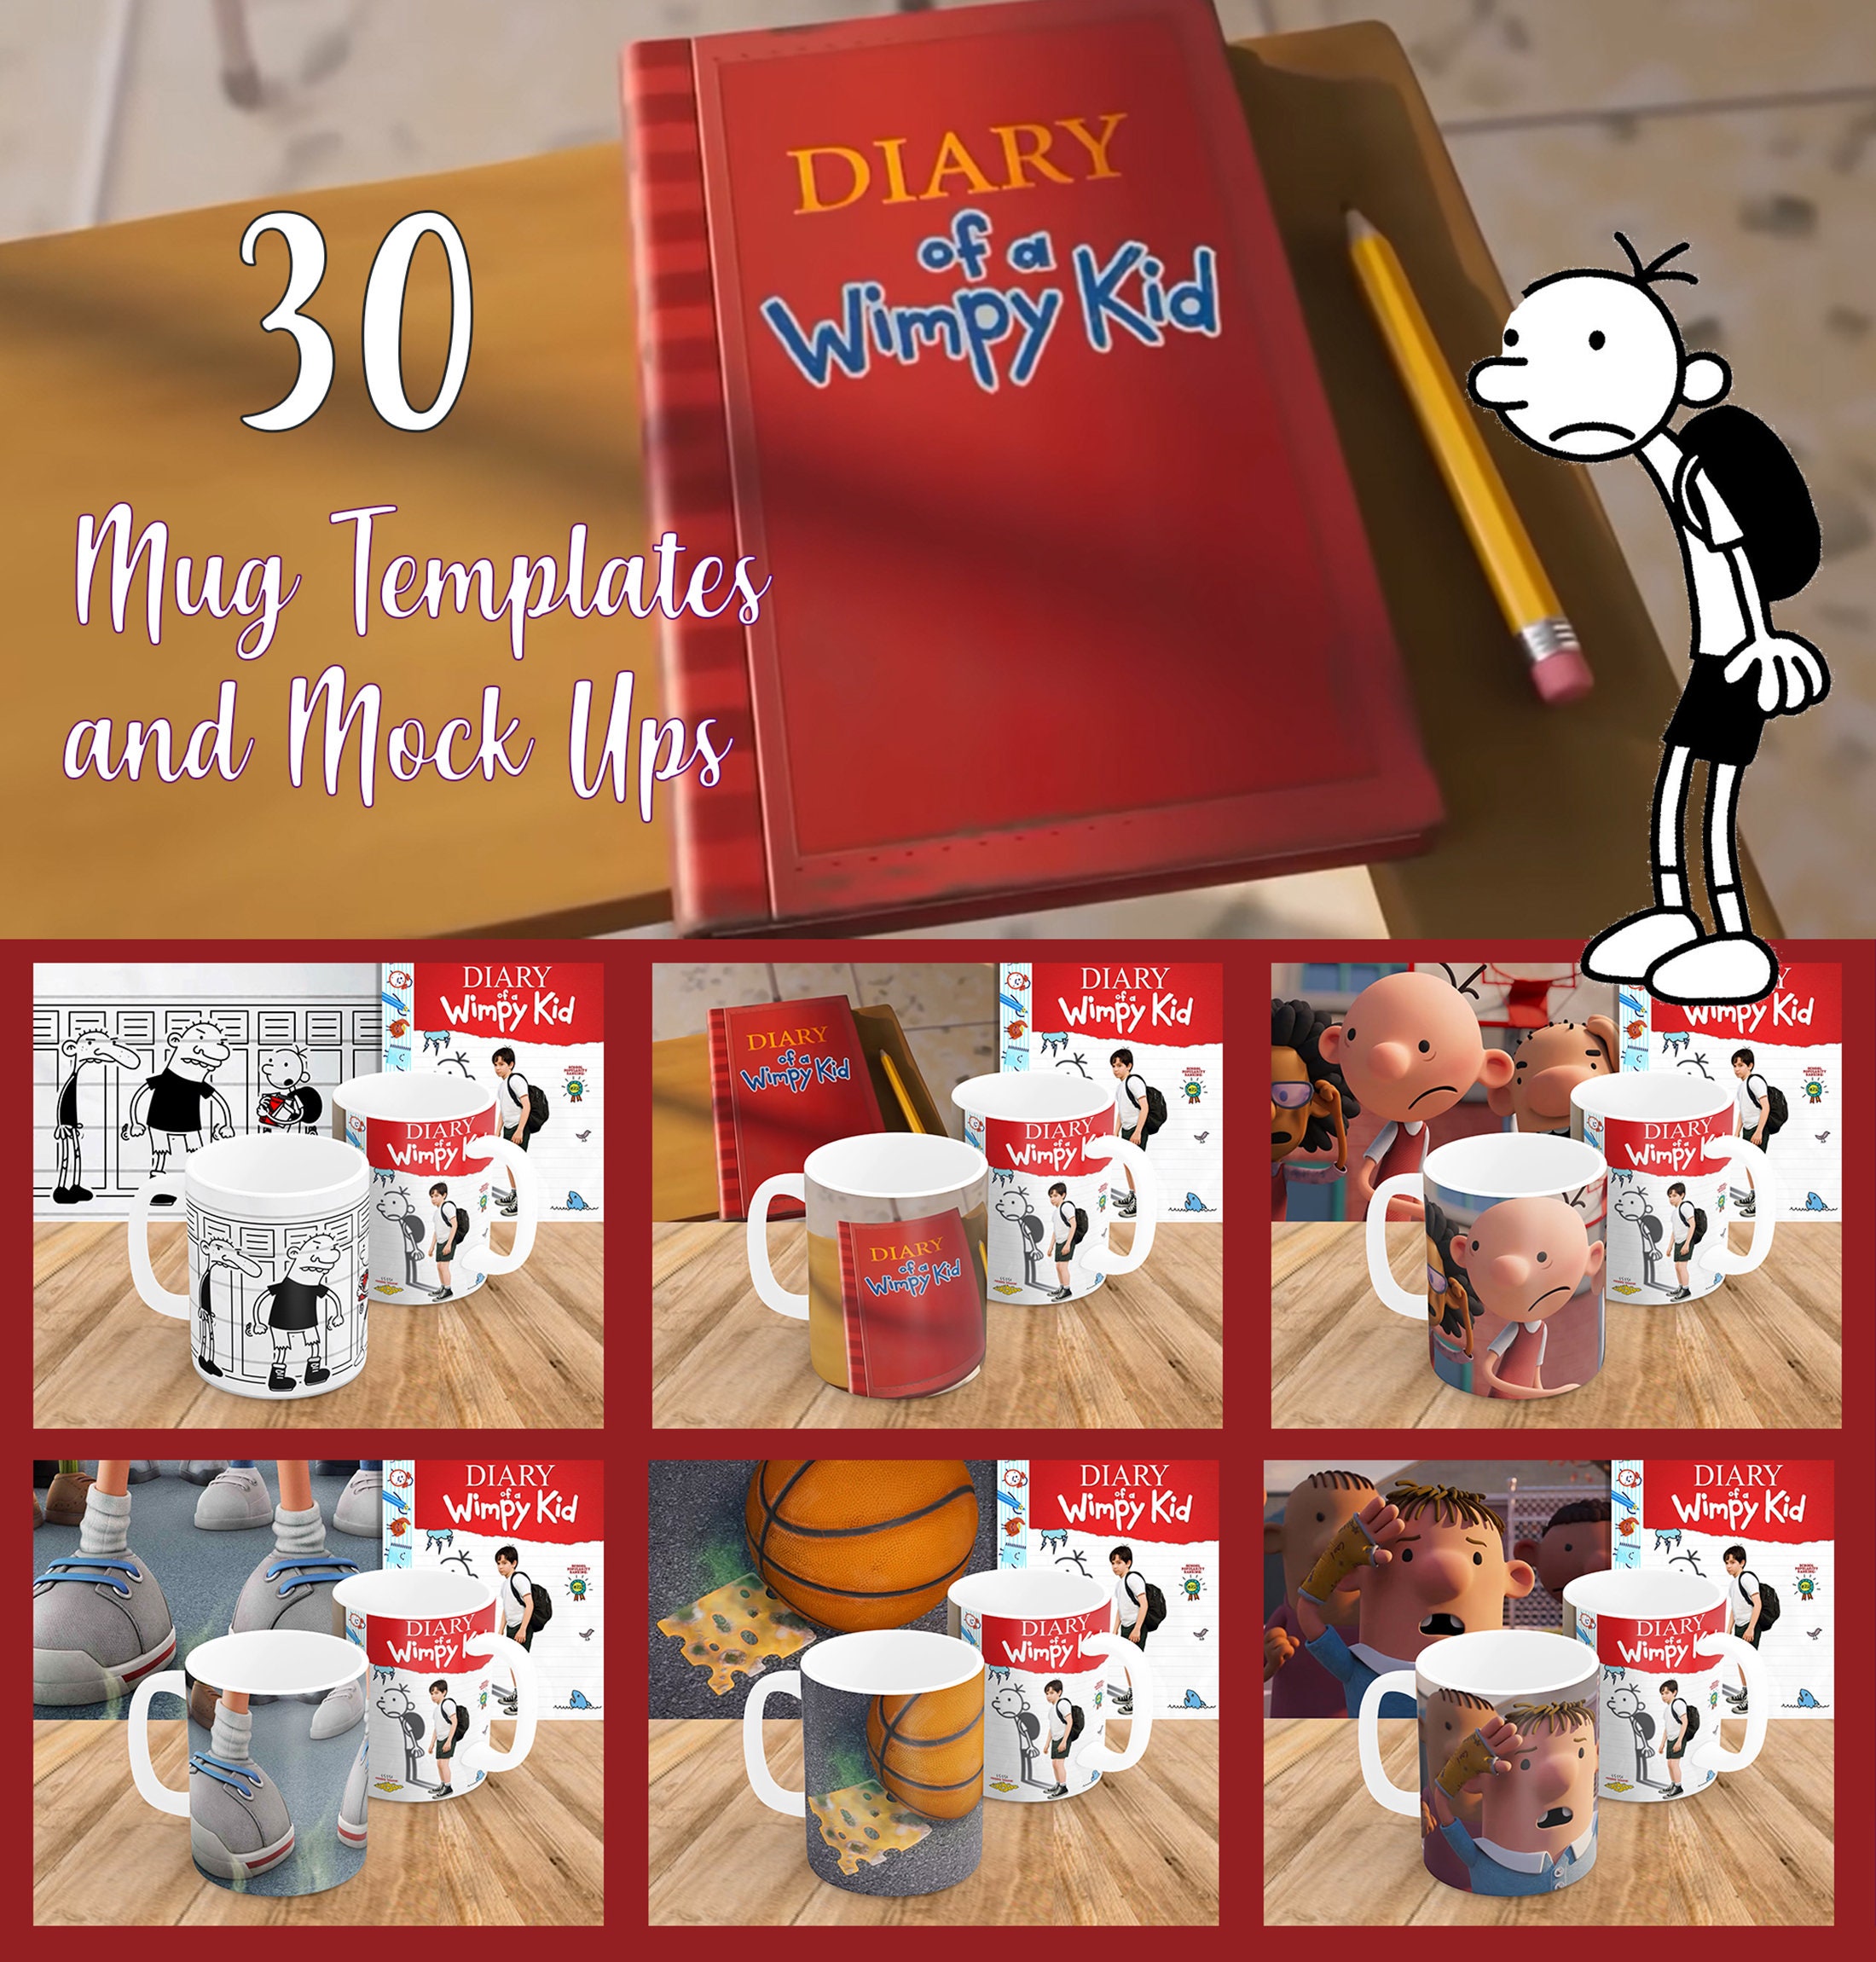 DIARY of a WIMPY KID Mug Templates 30 Templates and Mock up 2480x1122px  300DPI jpg Files Designs With Scenes From the Film 